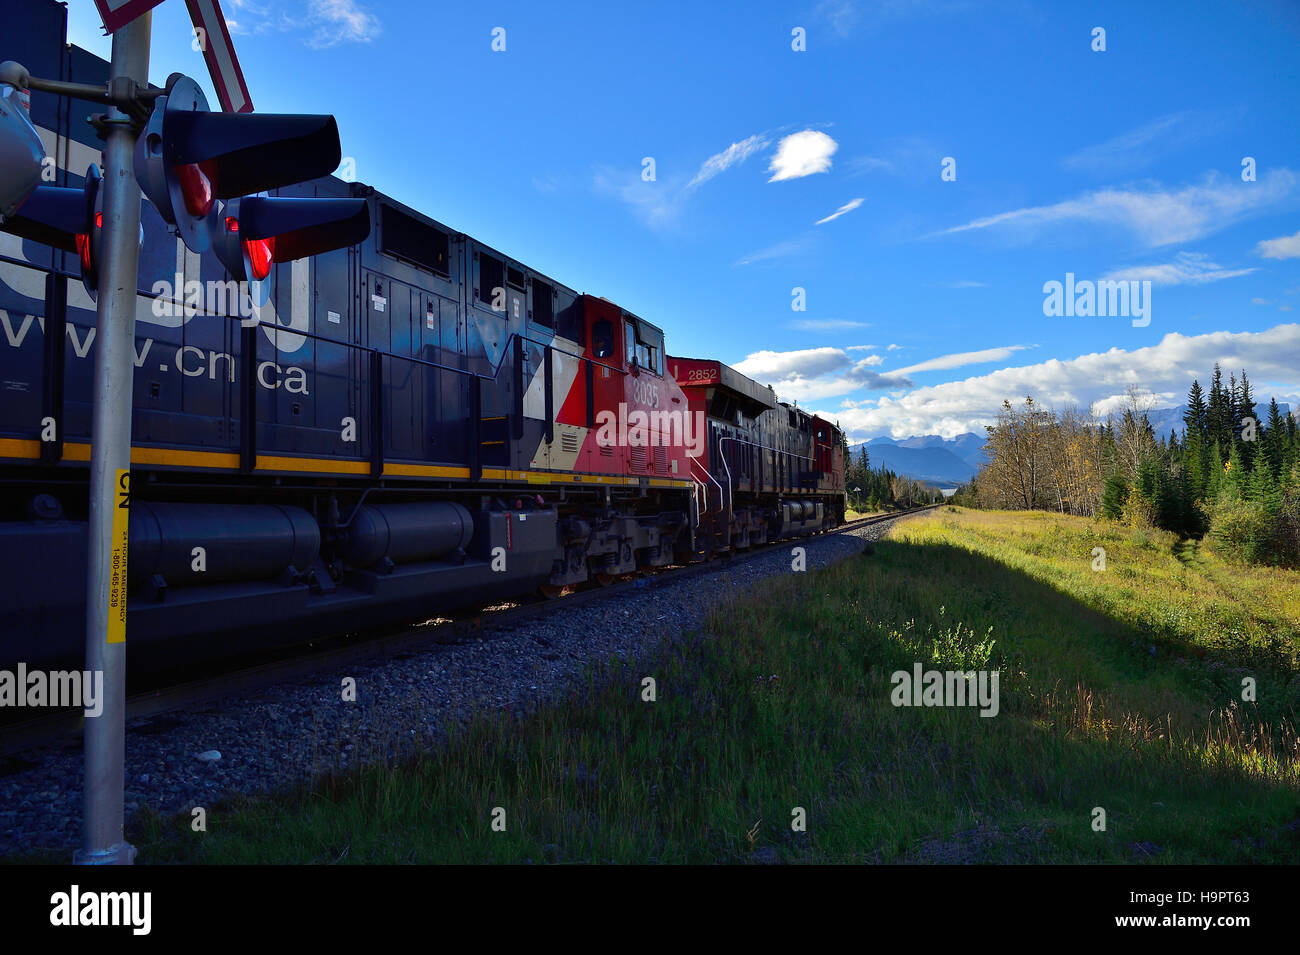 A C.N., freight train traveling toward the rocky mountains of Alberta Canada. Stock Photo